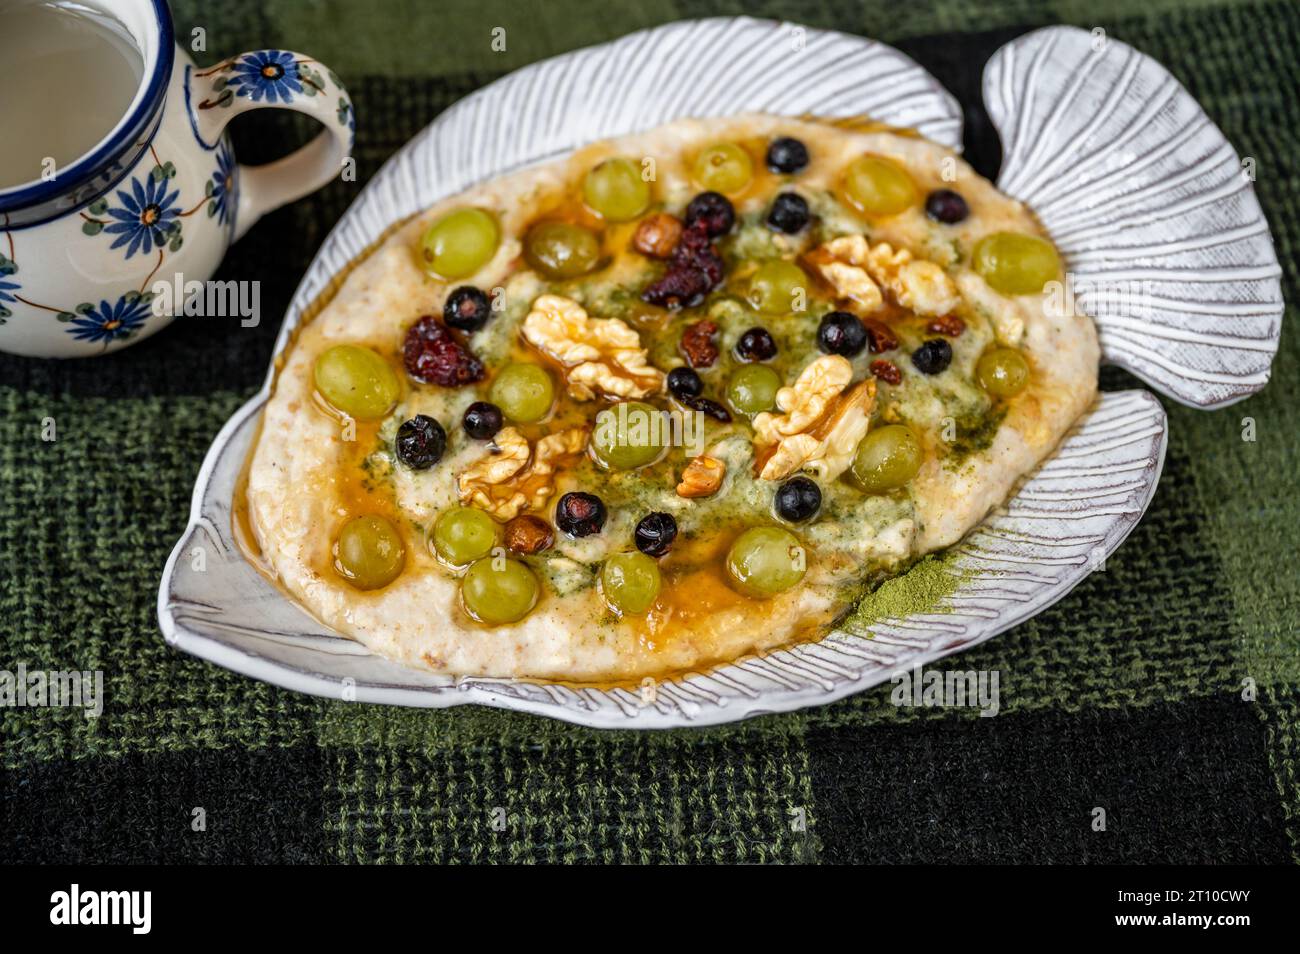 Porridge oatmeal with fruit, nut, honey and moringa powder in decorative fish-shaped plate on green checkered green wool tablecloth, cup. Stock Photo